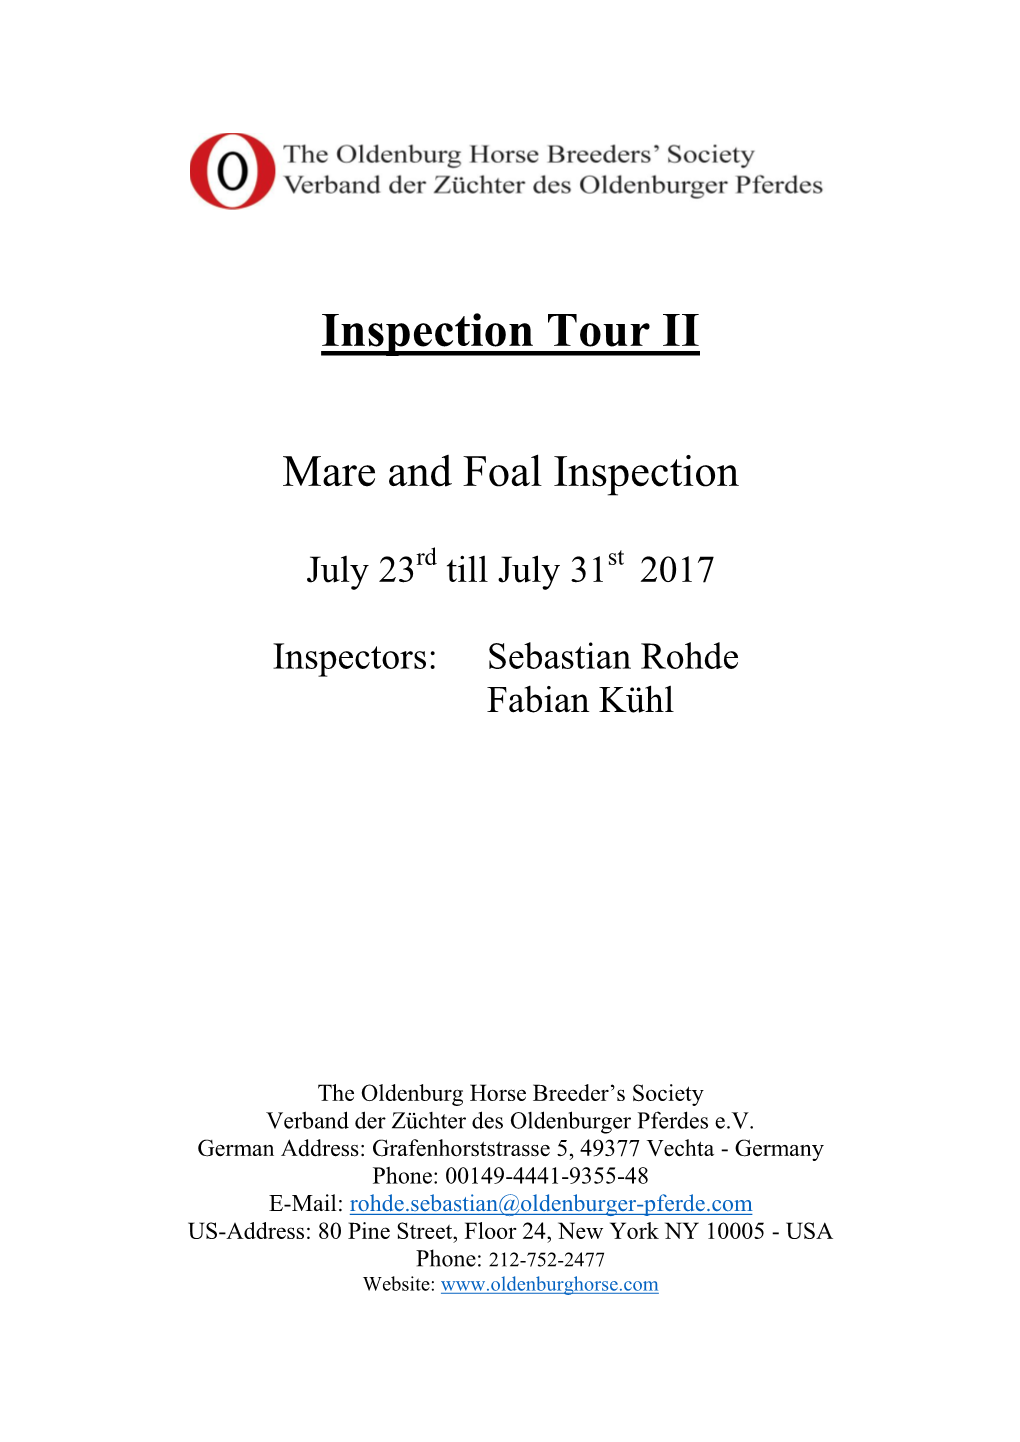 Inspection Tour II